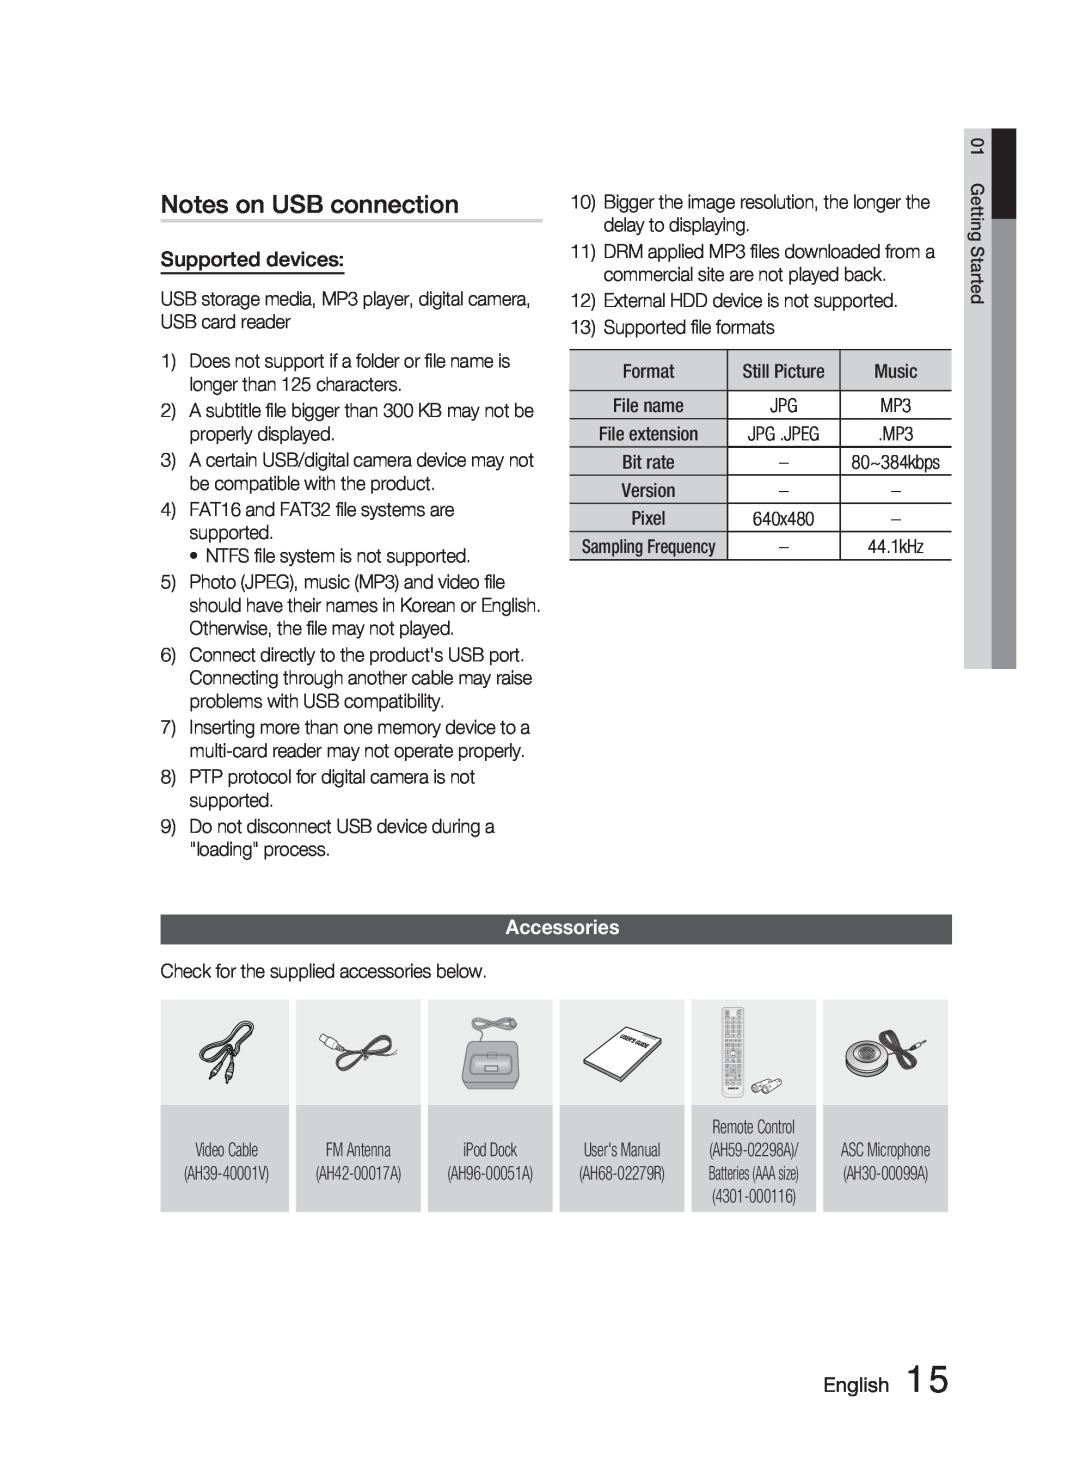 Samsung HT-C6900W user manual Notes on USB connection, Supported devices, Accessories, English 